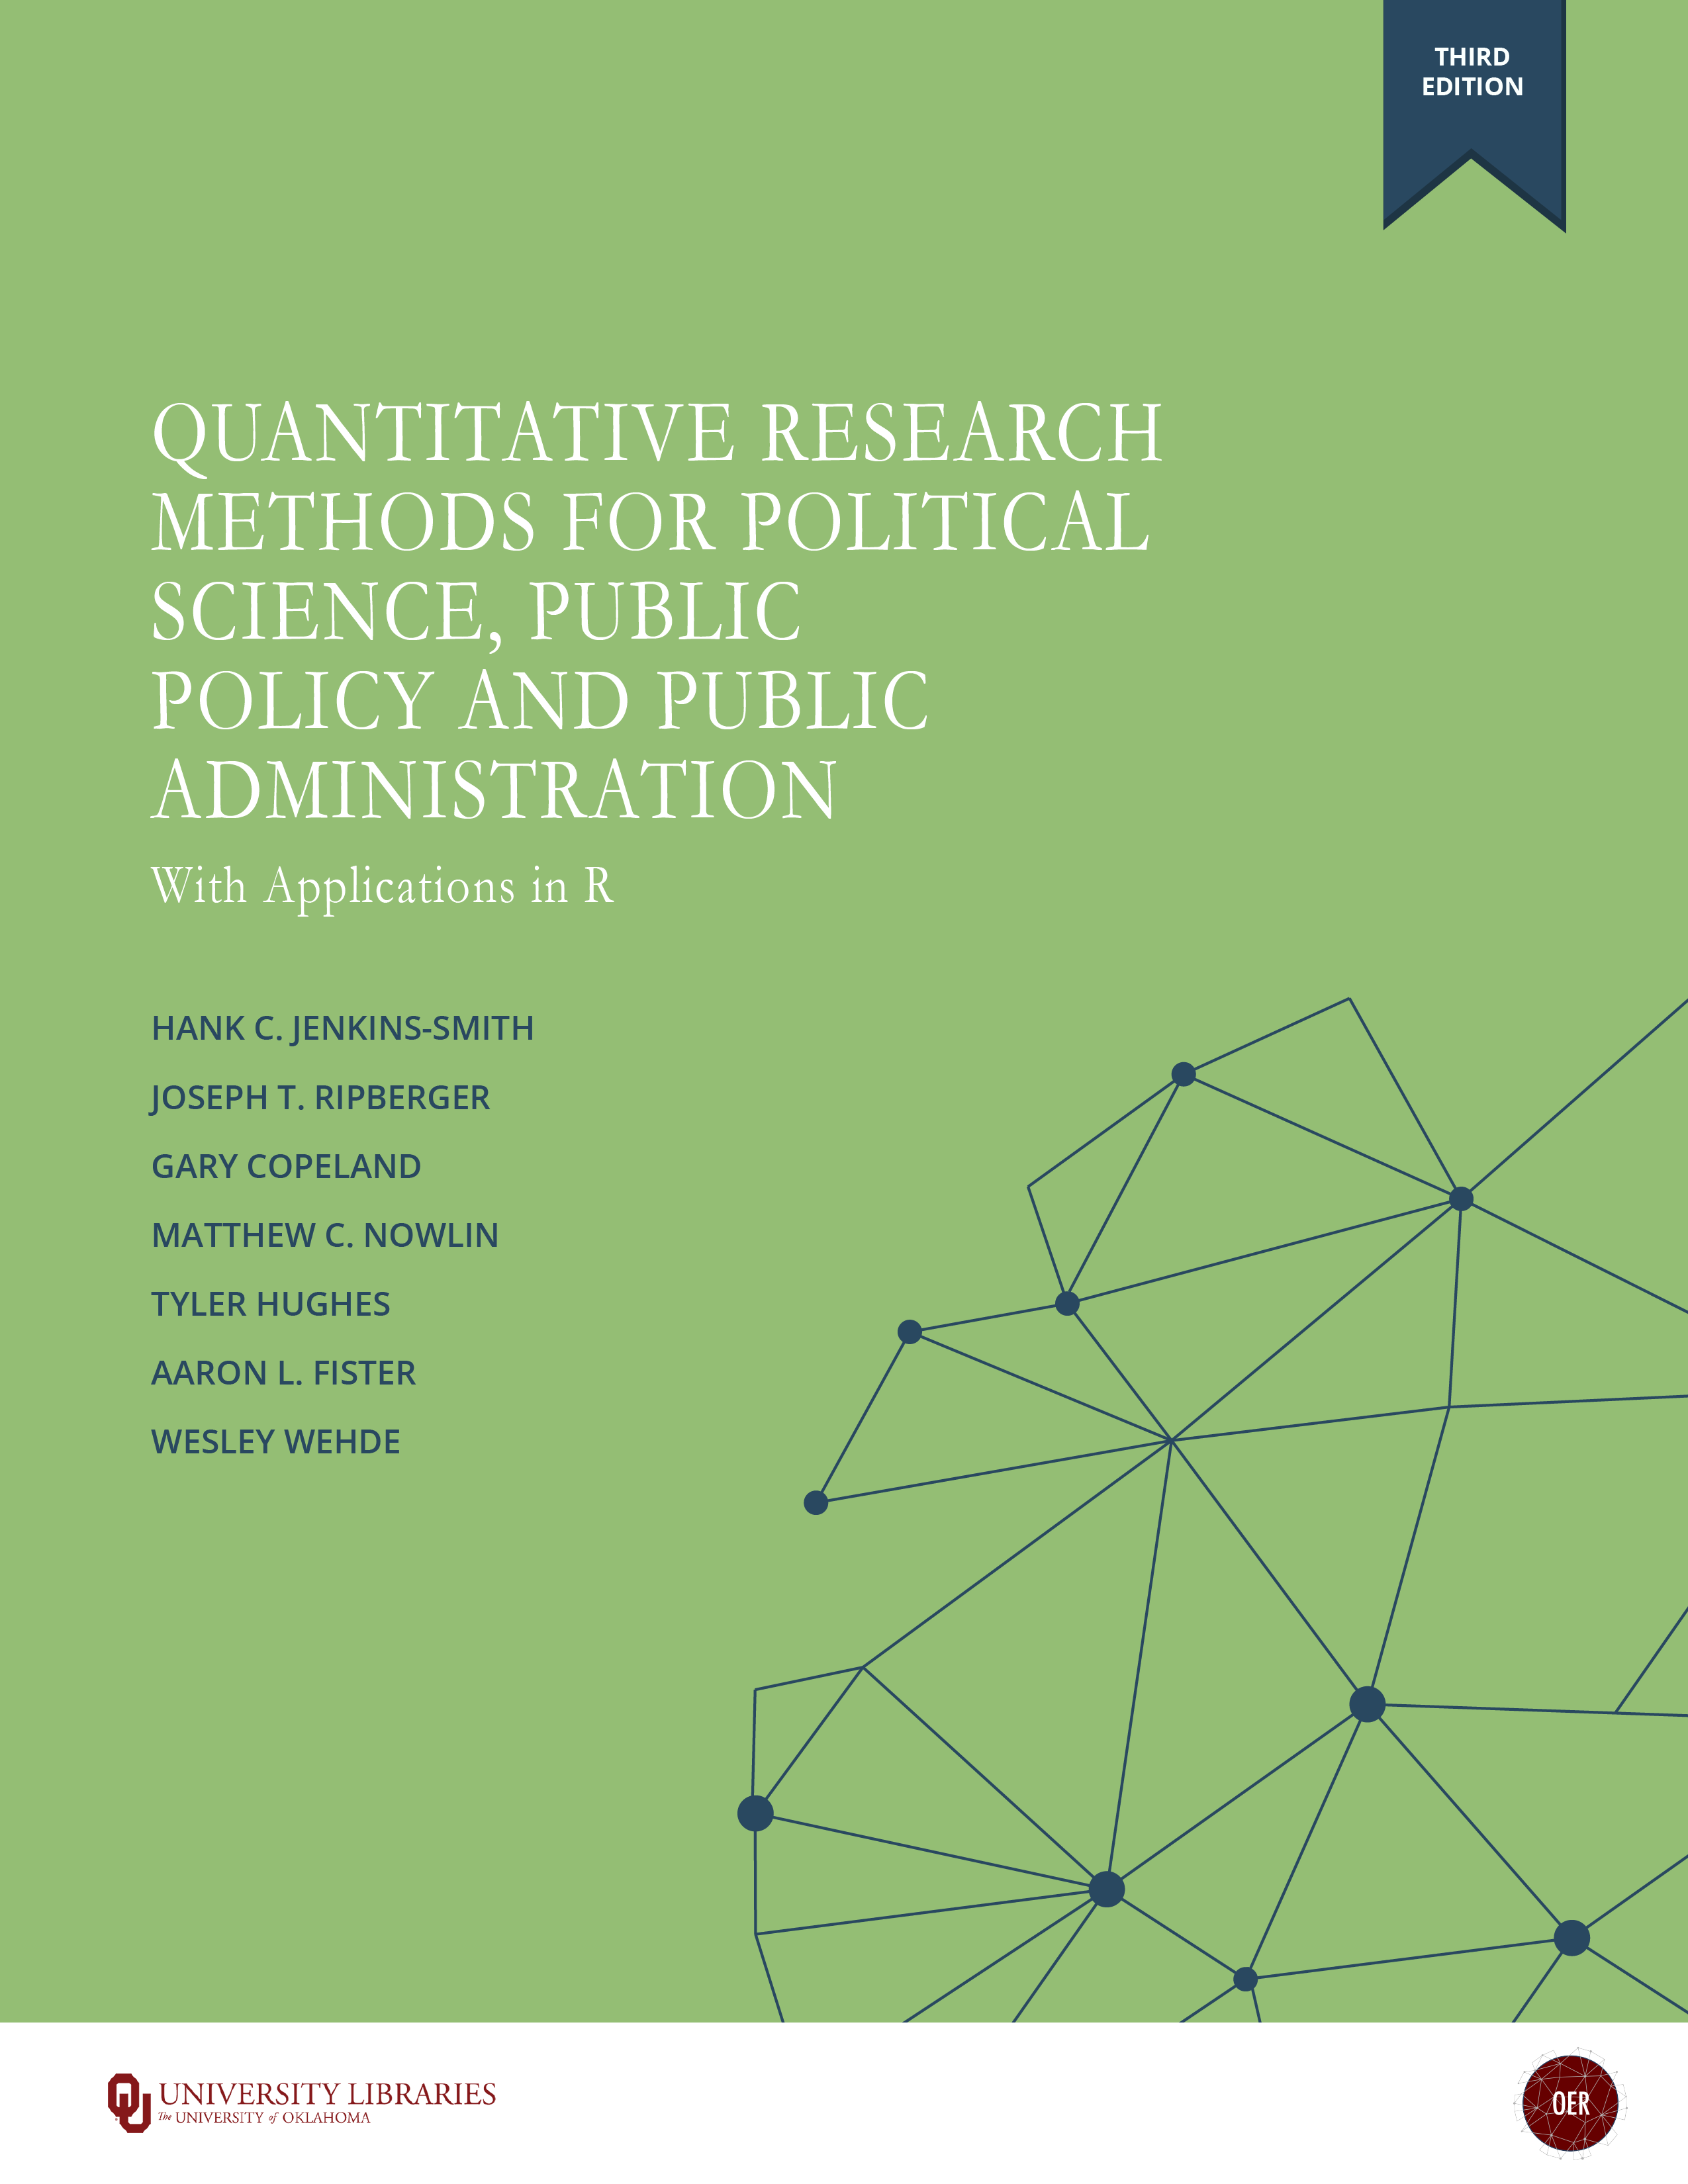 qualitative research about political science